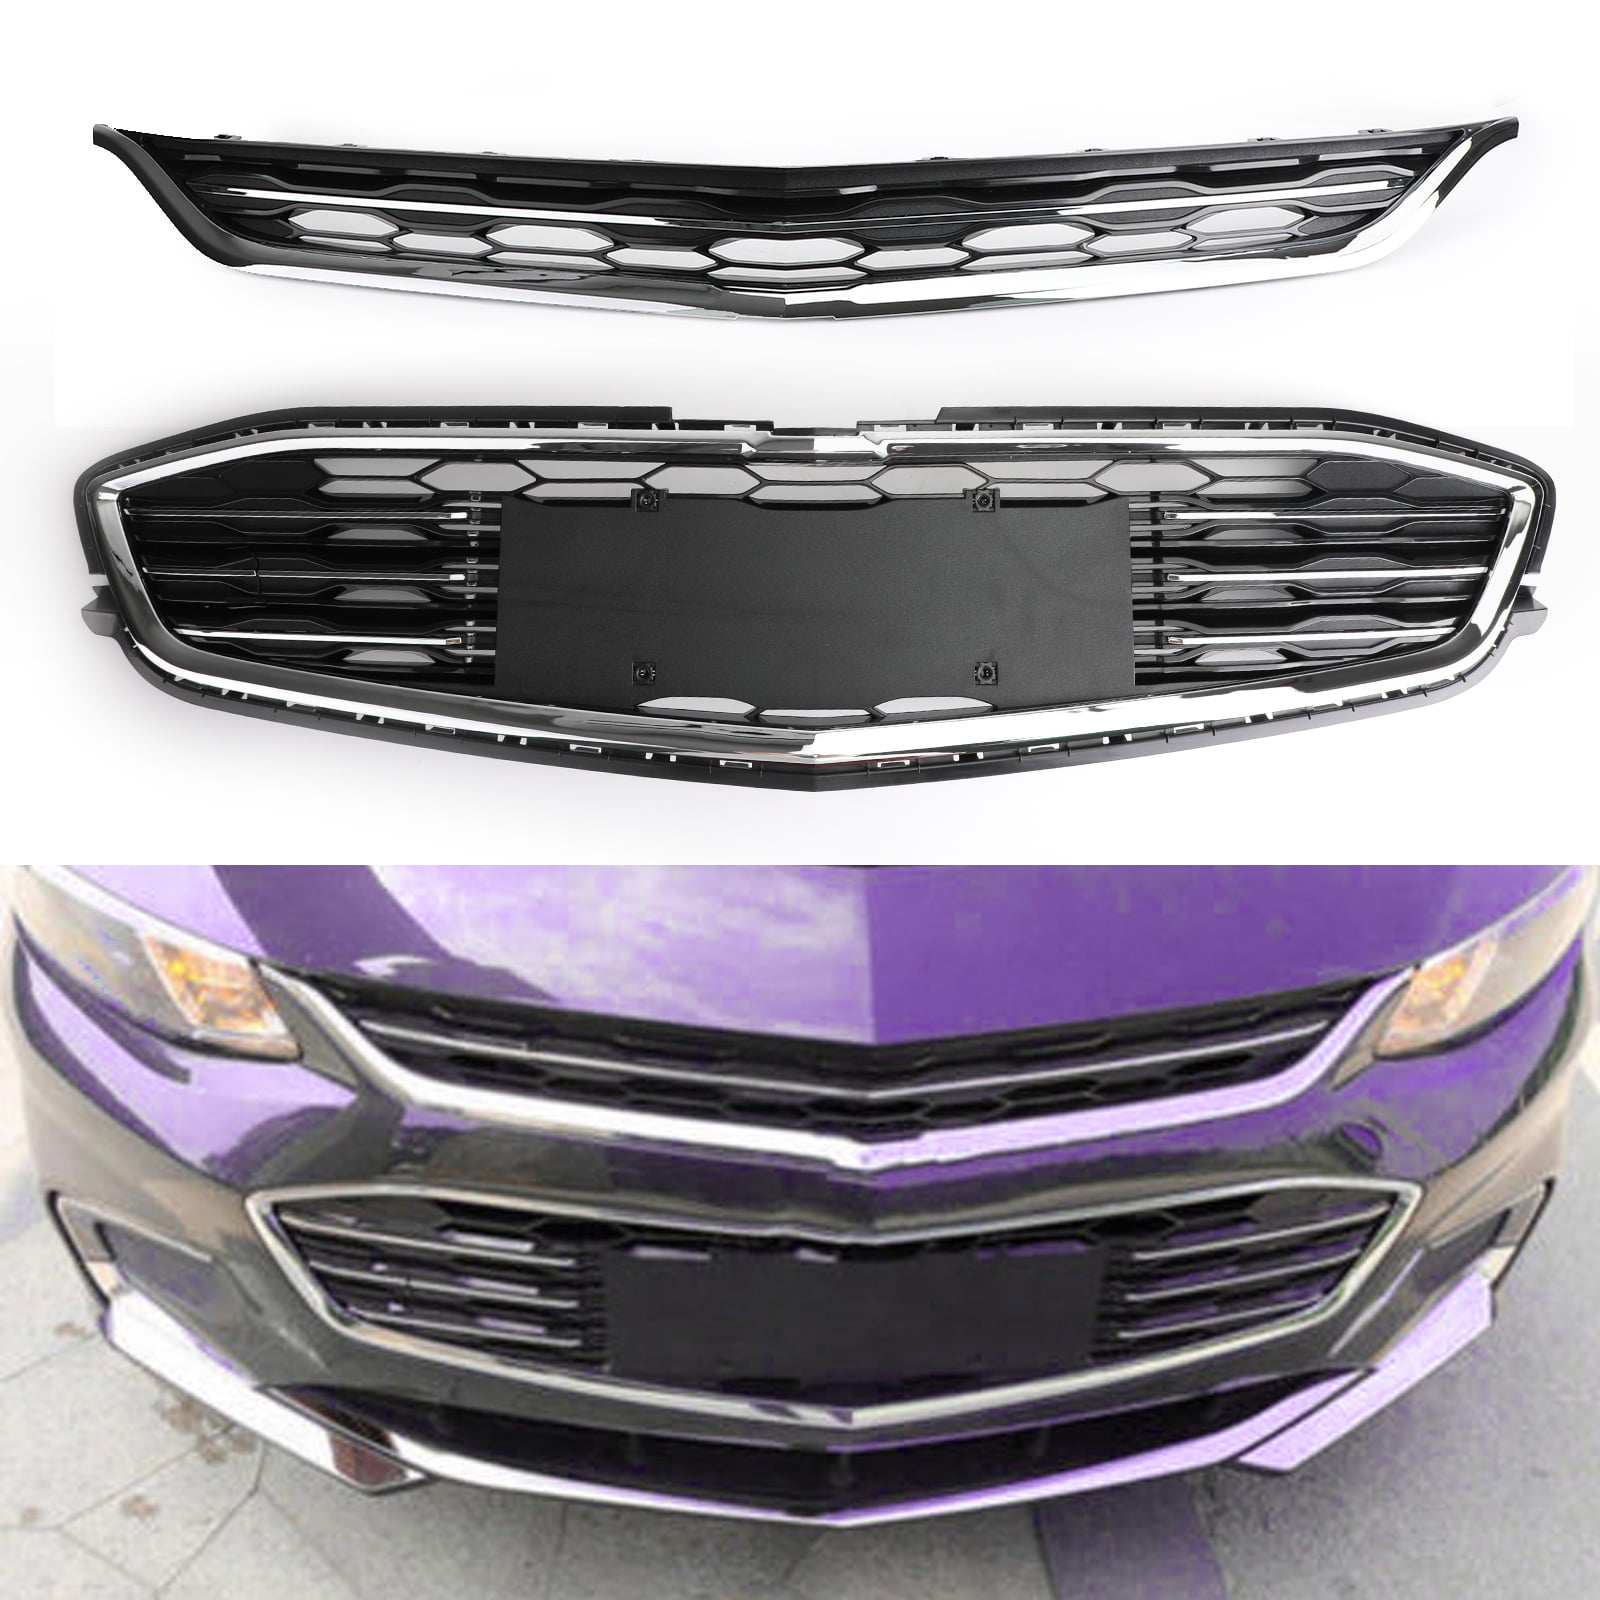 Matte Black ABS 3D Wave Mesh Front Bumper Grille//Grill for 97-99 Chevy Malibu